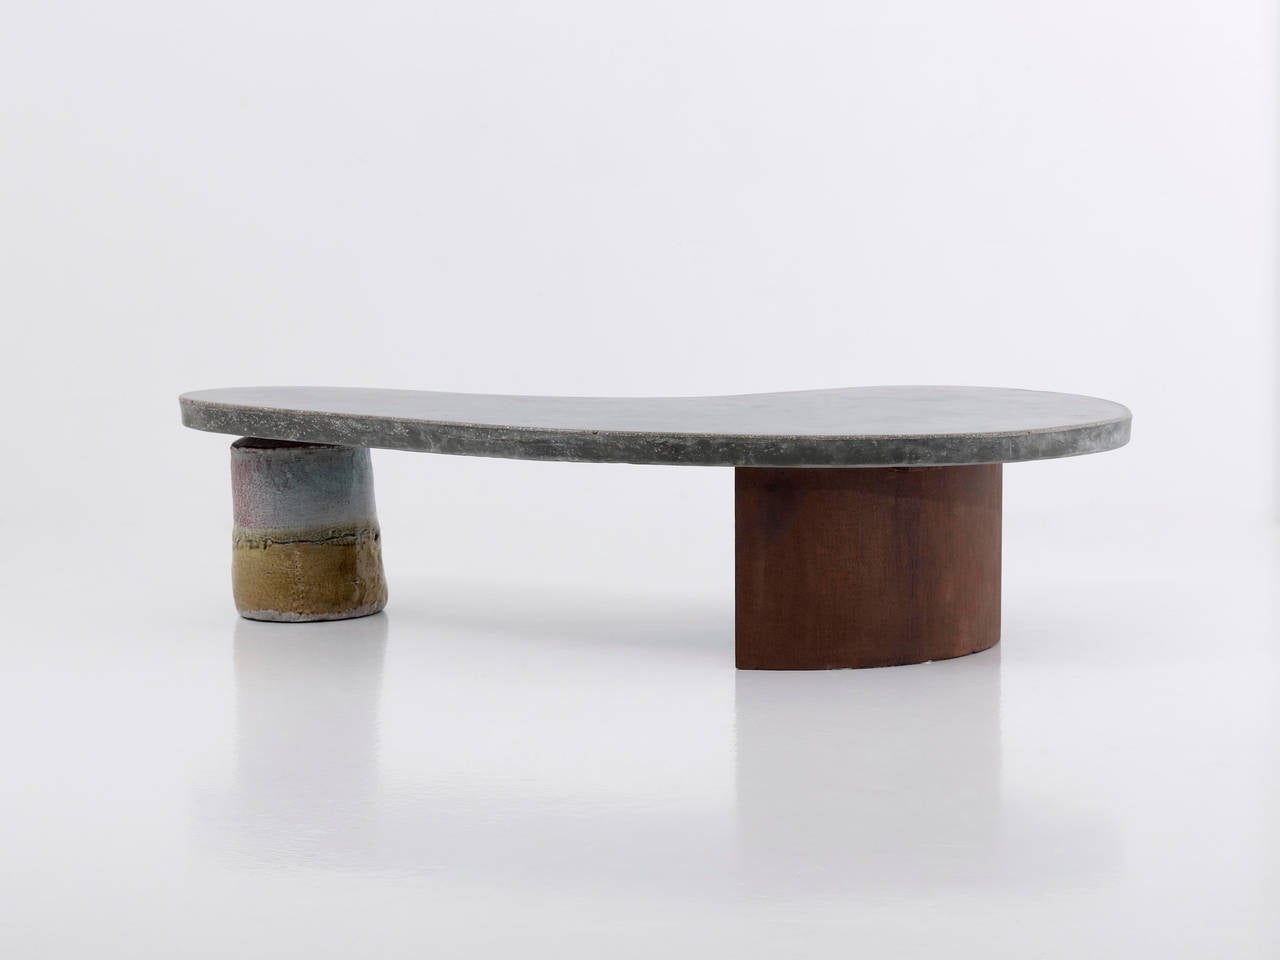 Organic Lined Concrete Bench by Lee Hun Chung, 2012 For Sale 3